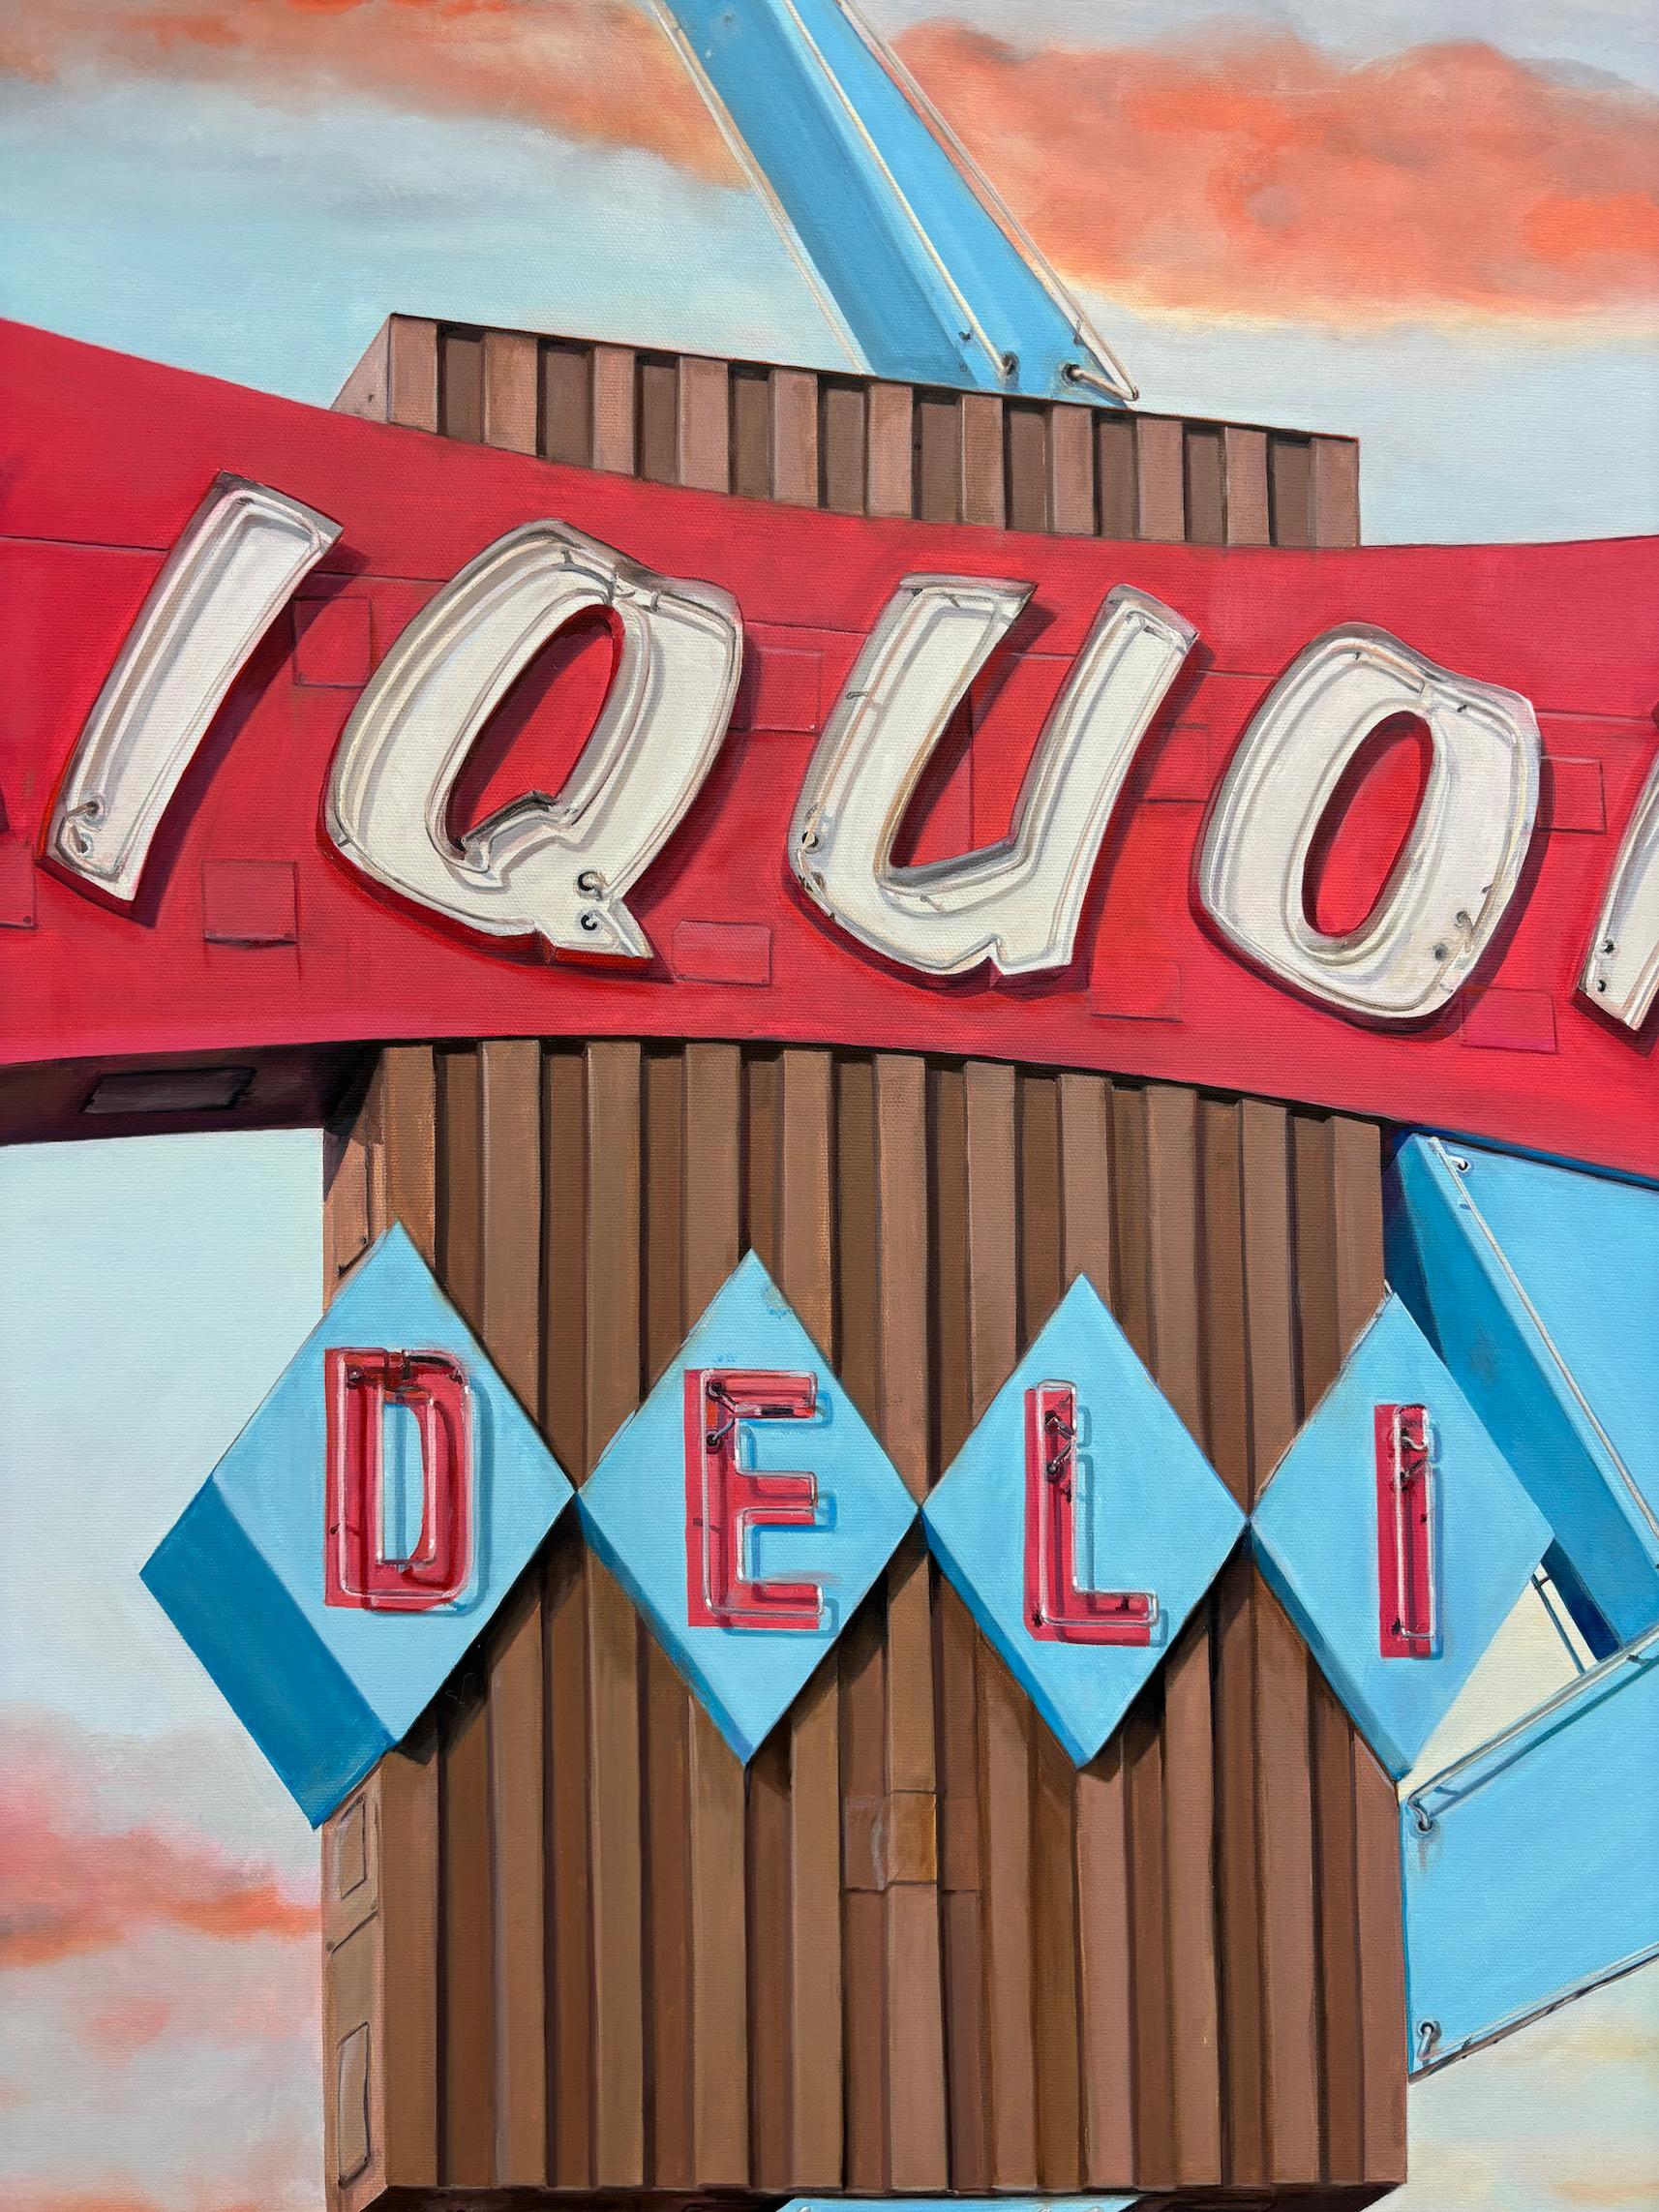 or nearly twenty years, Thompson has focused primarily on painting old neon signs that have somehow avoided the wrecking ball - the signs that have lived and beat the odds.  These sculptural signs exist as historically and emotionally charged